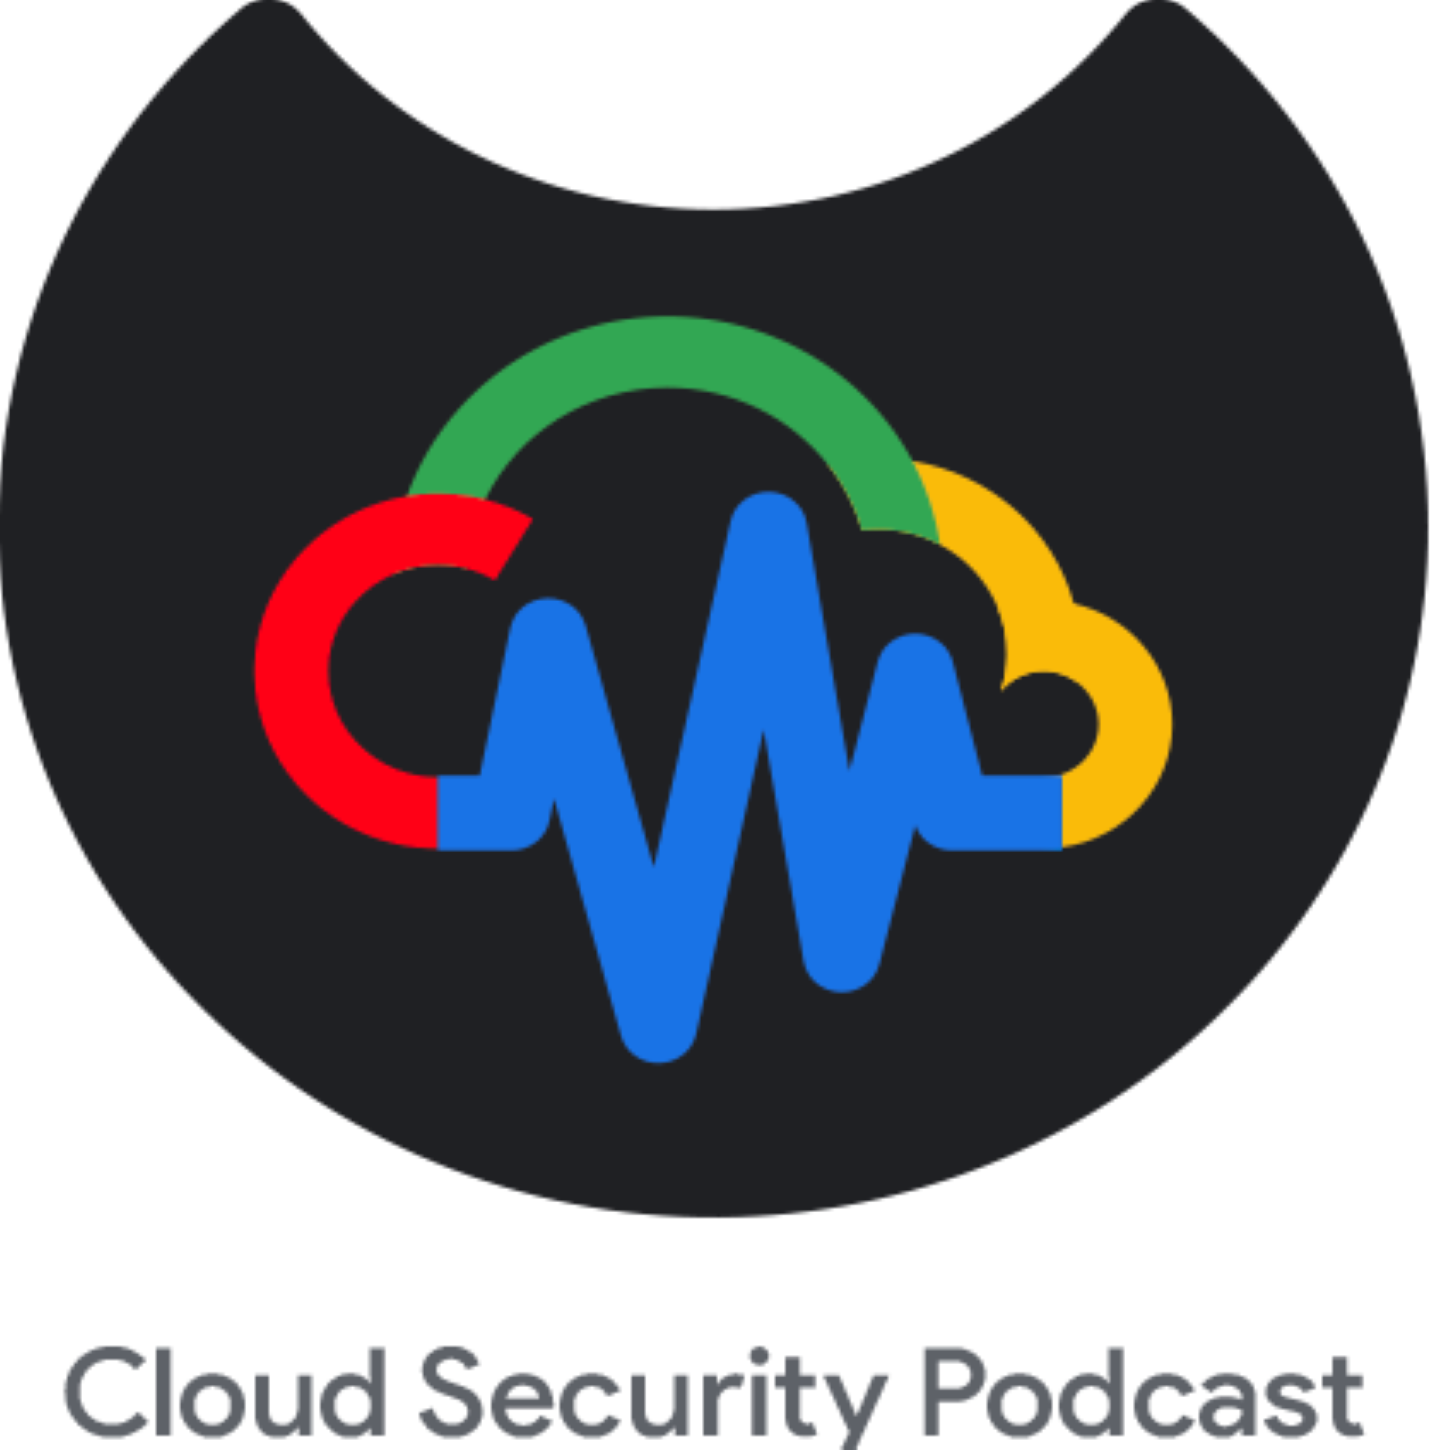 A highlight from EP135  AI and Security: The Good, the Bad, and the Magical